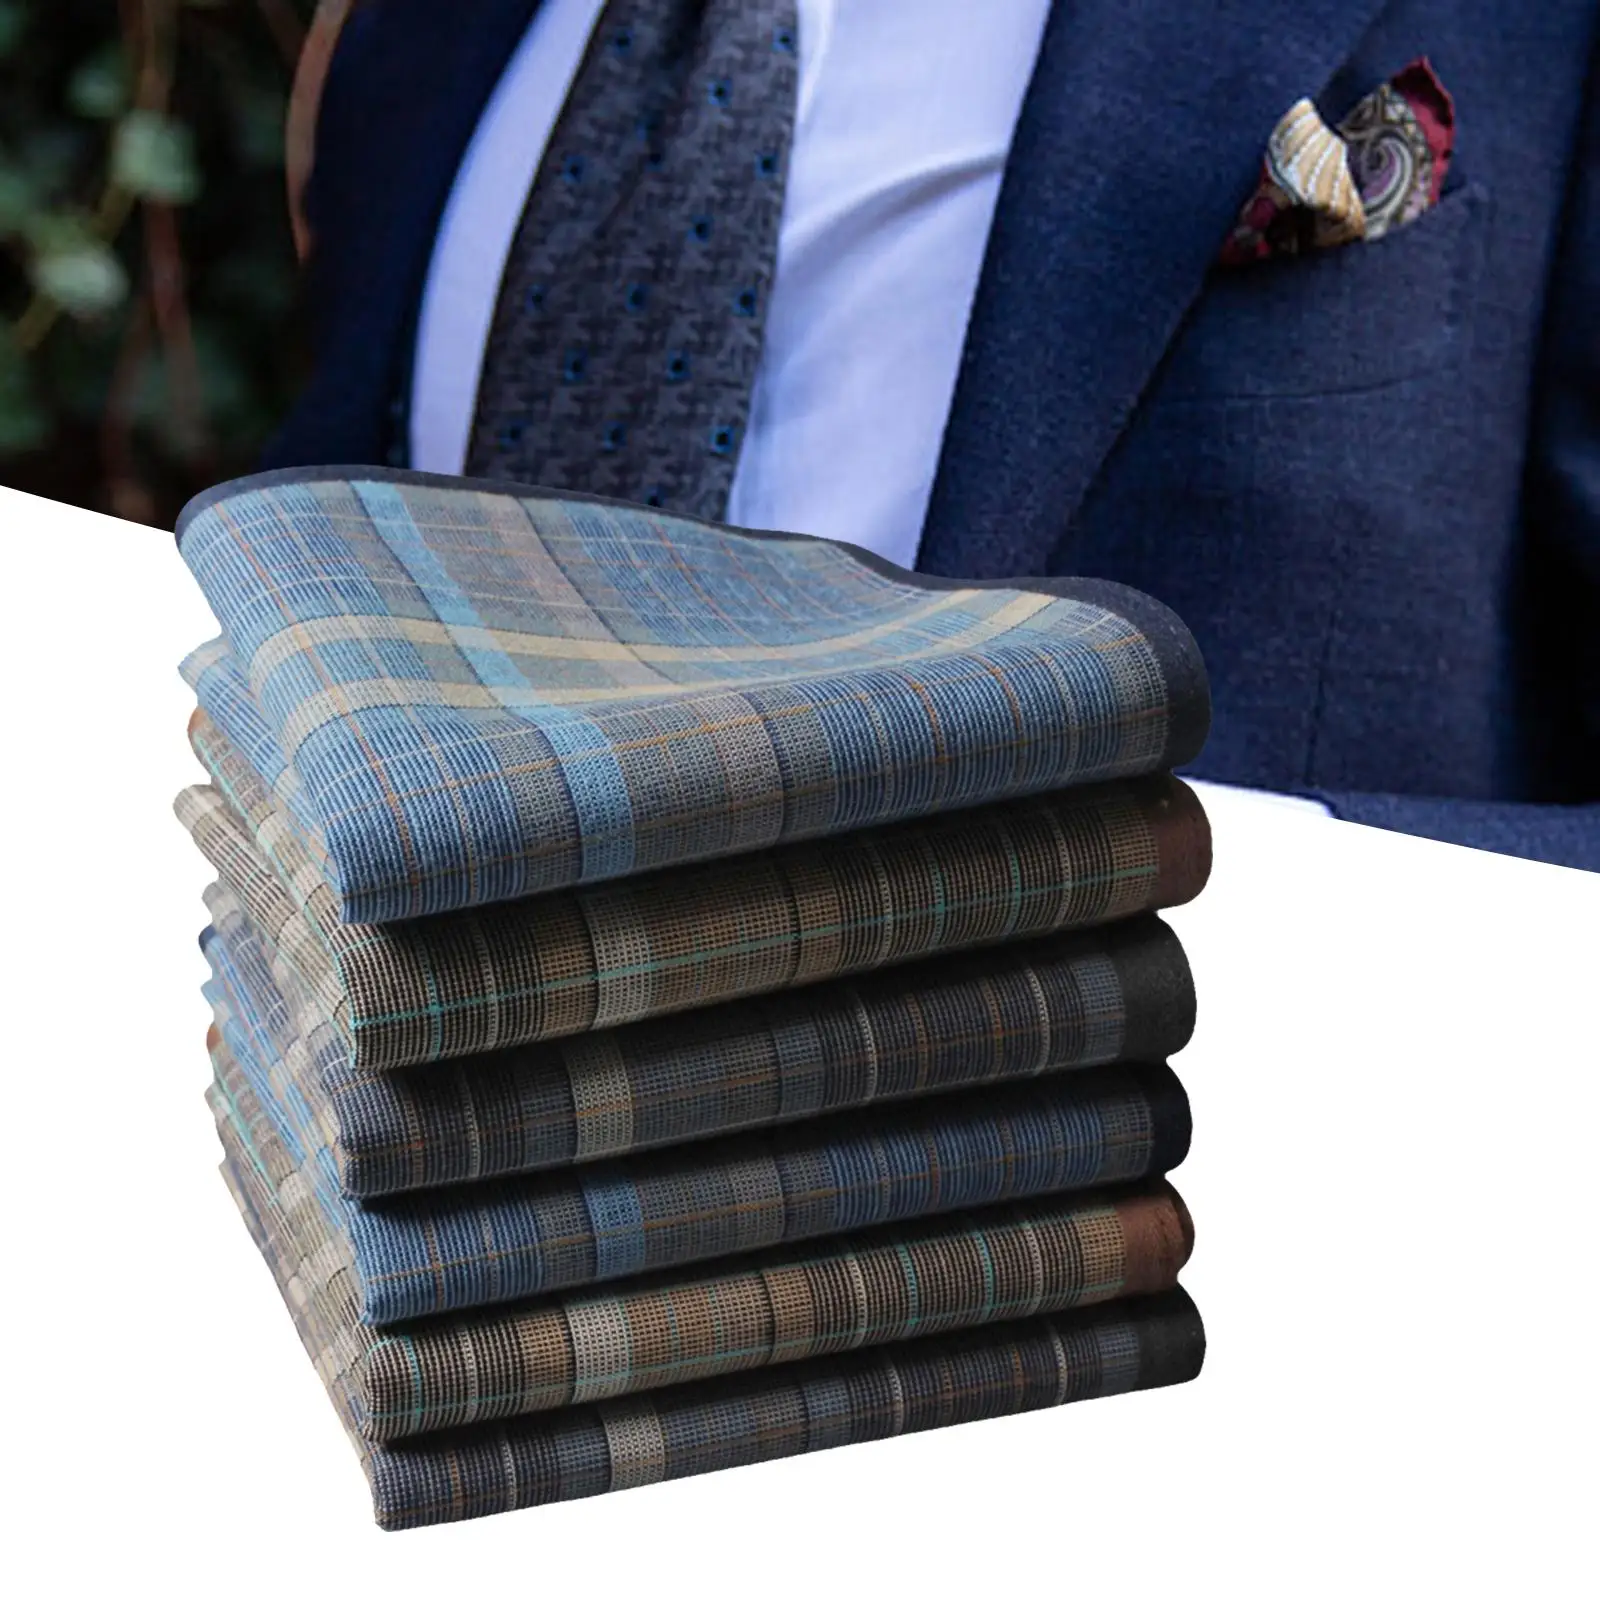 6x Handkerchiefs for Men Cotton Plaid Stripe Checkered Pattern Pocket Squares for Women Men Grandfathers Birthday Formal Casual